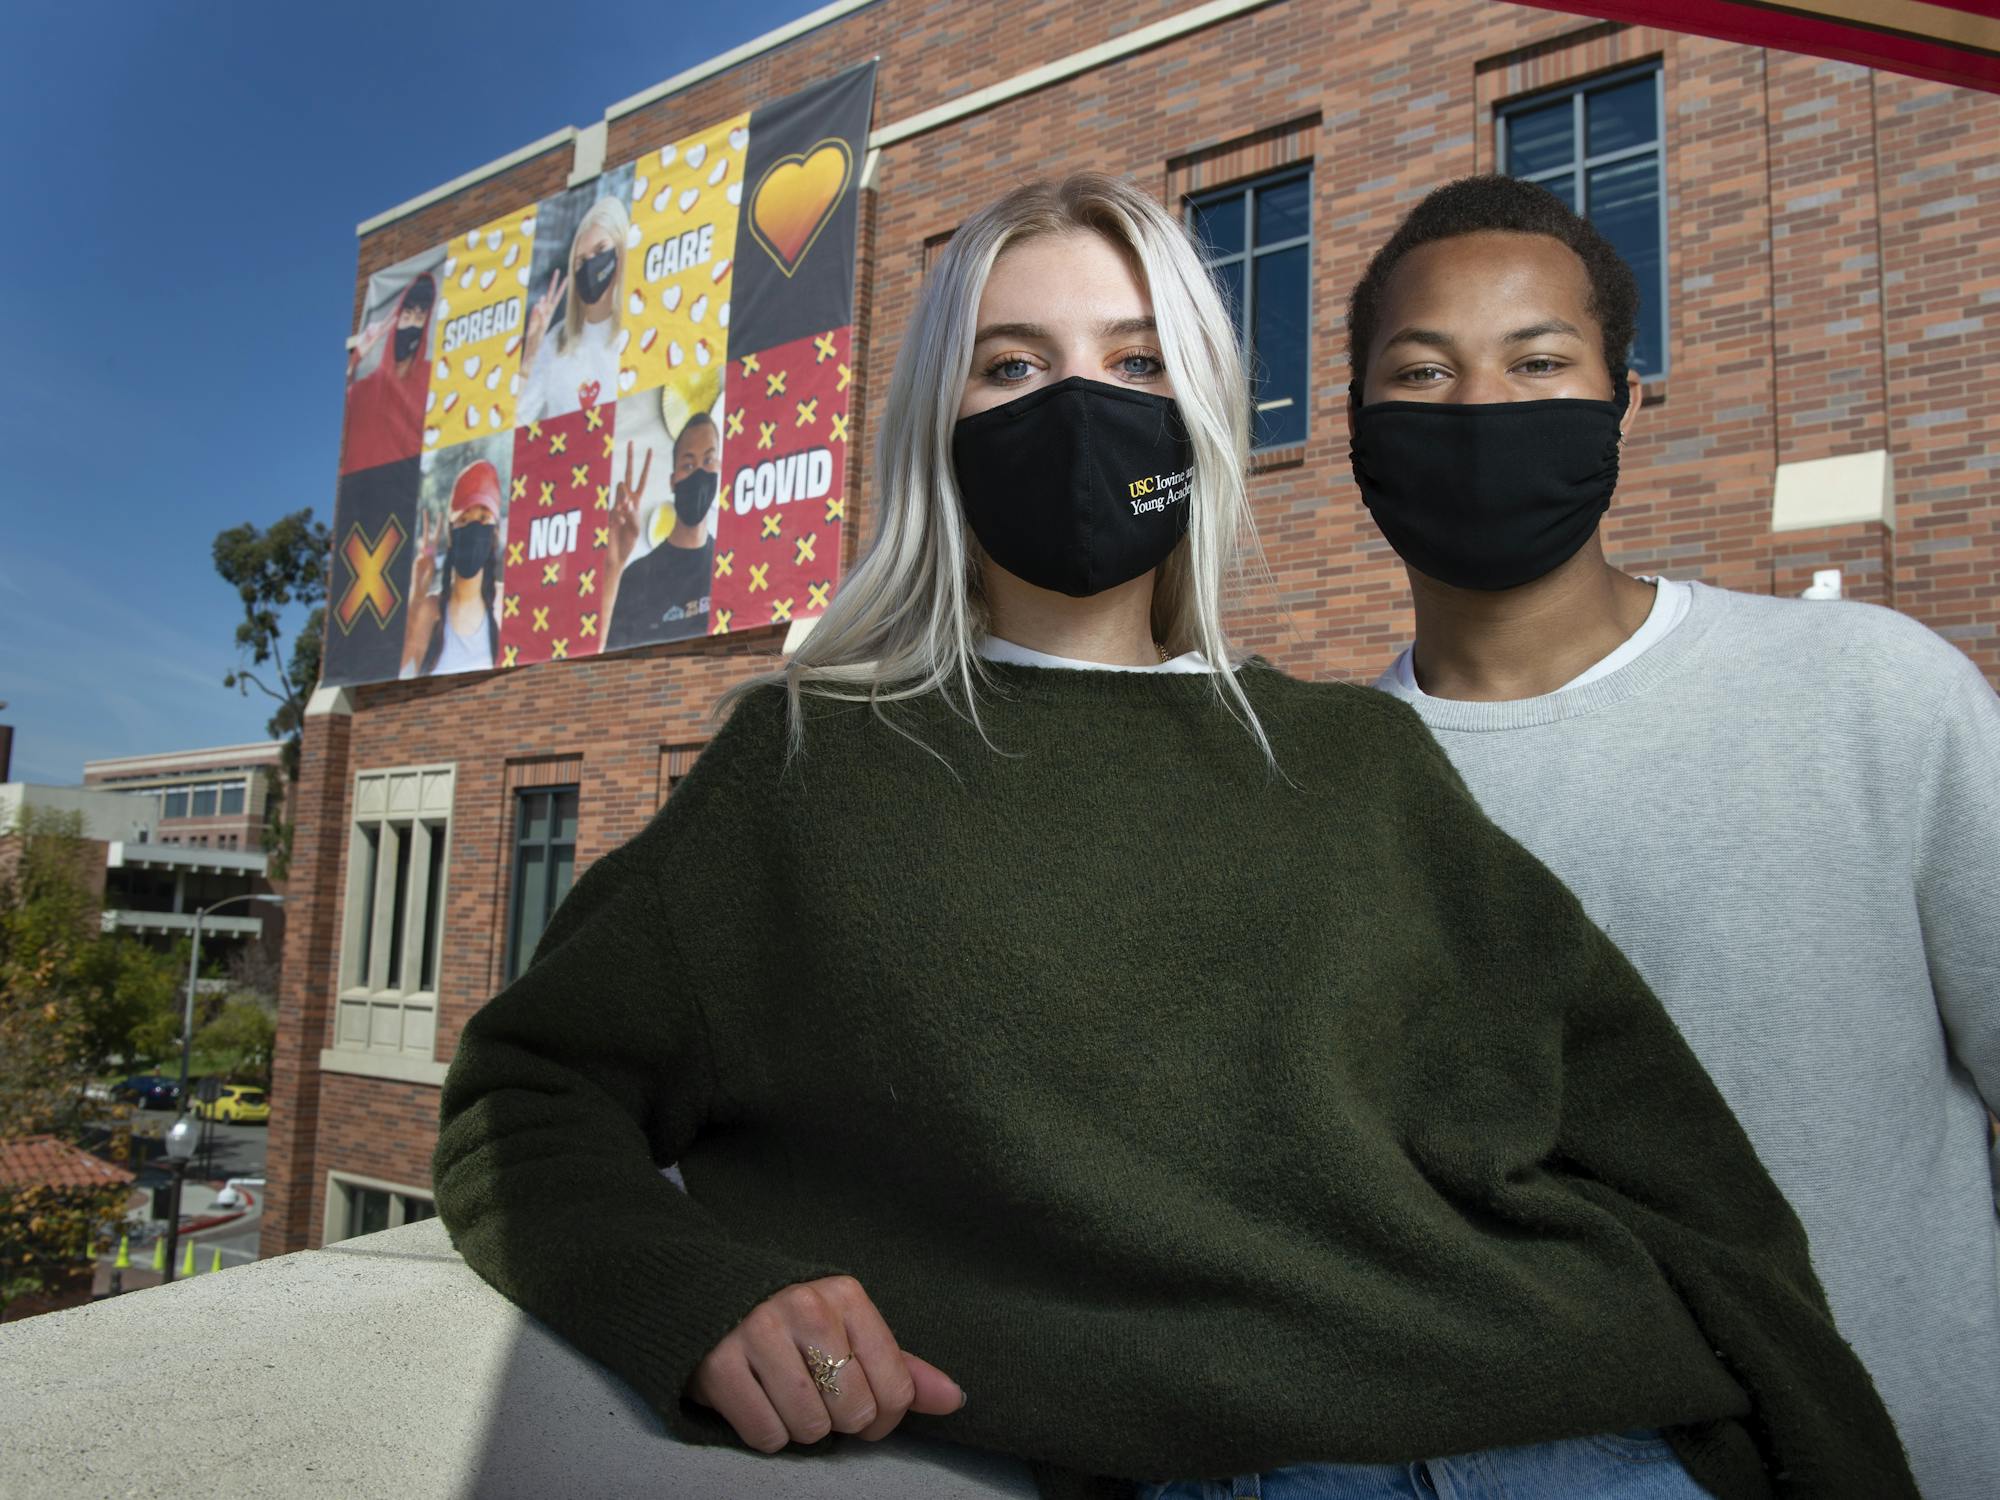 Two students wearing masks in front of building